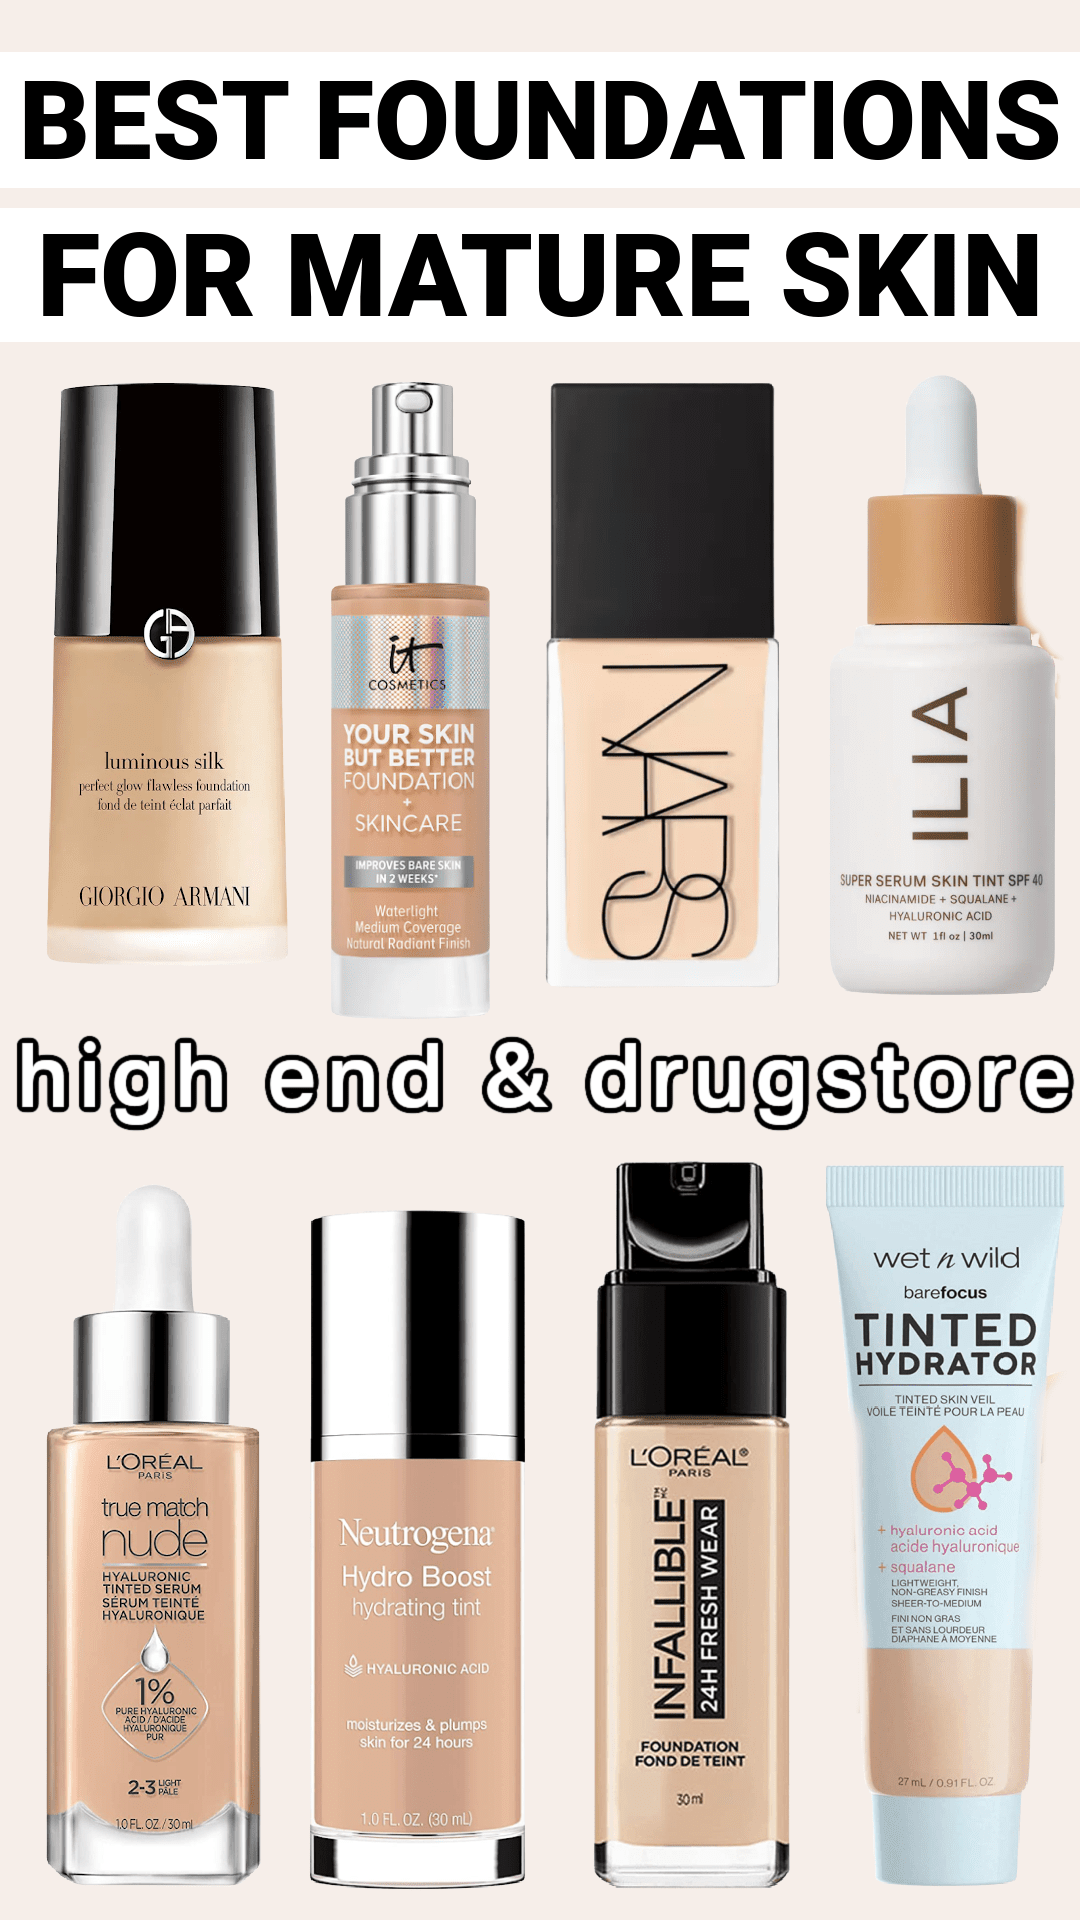 The Best Foundations for Mature Skin - Meg O. on Go